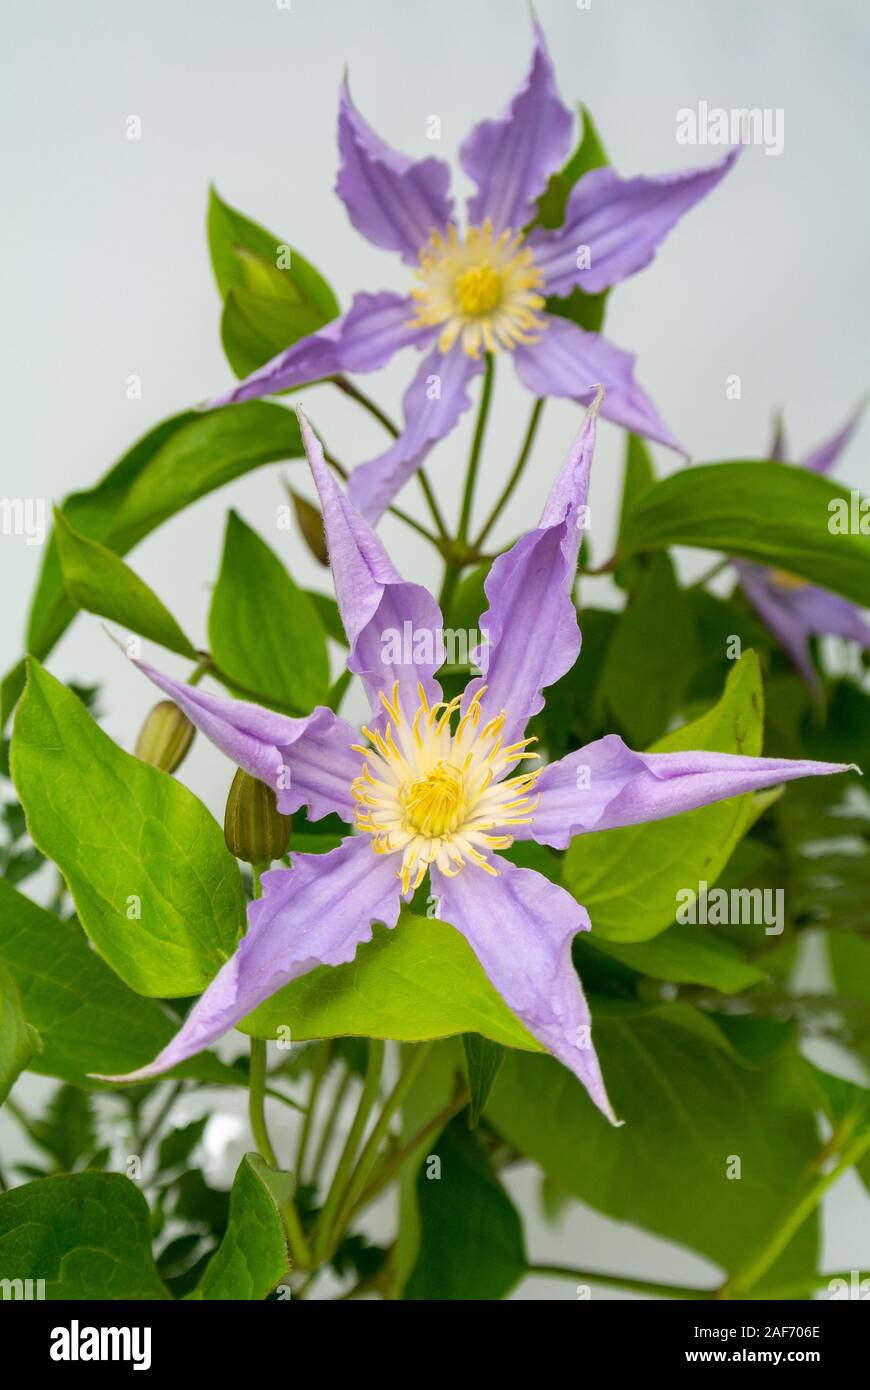 PURPLE CLEMATIS FLOWER WITH WHITE BACKGROUND Stock Photo